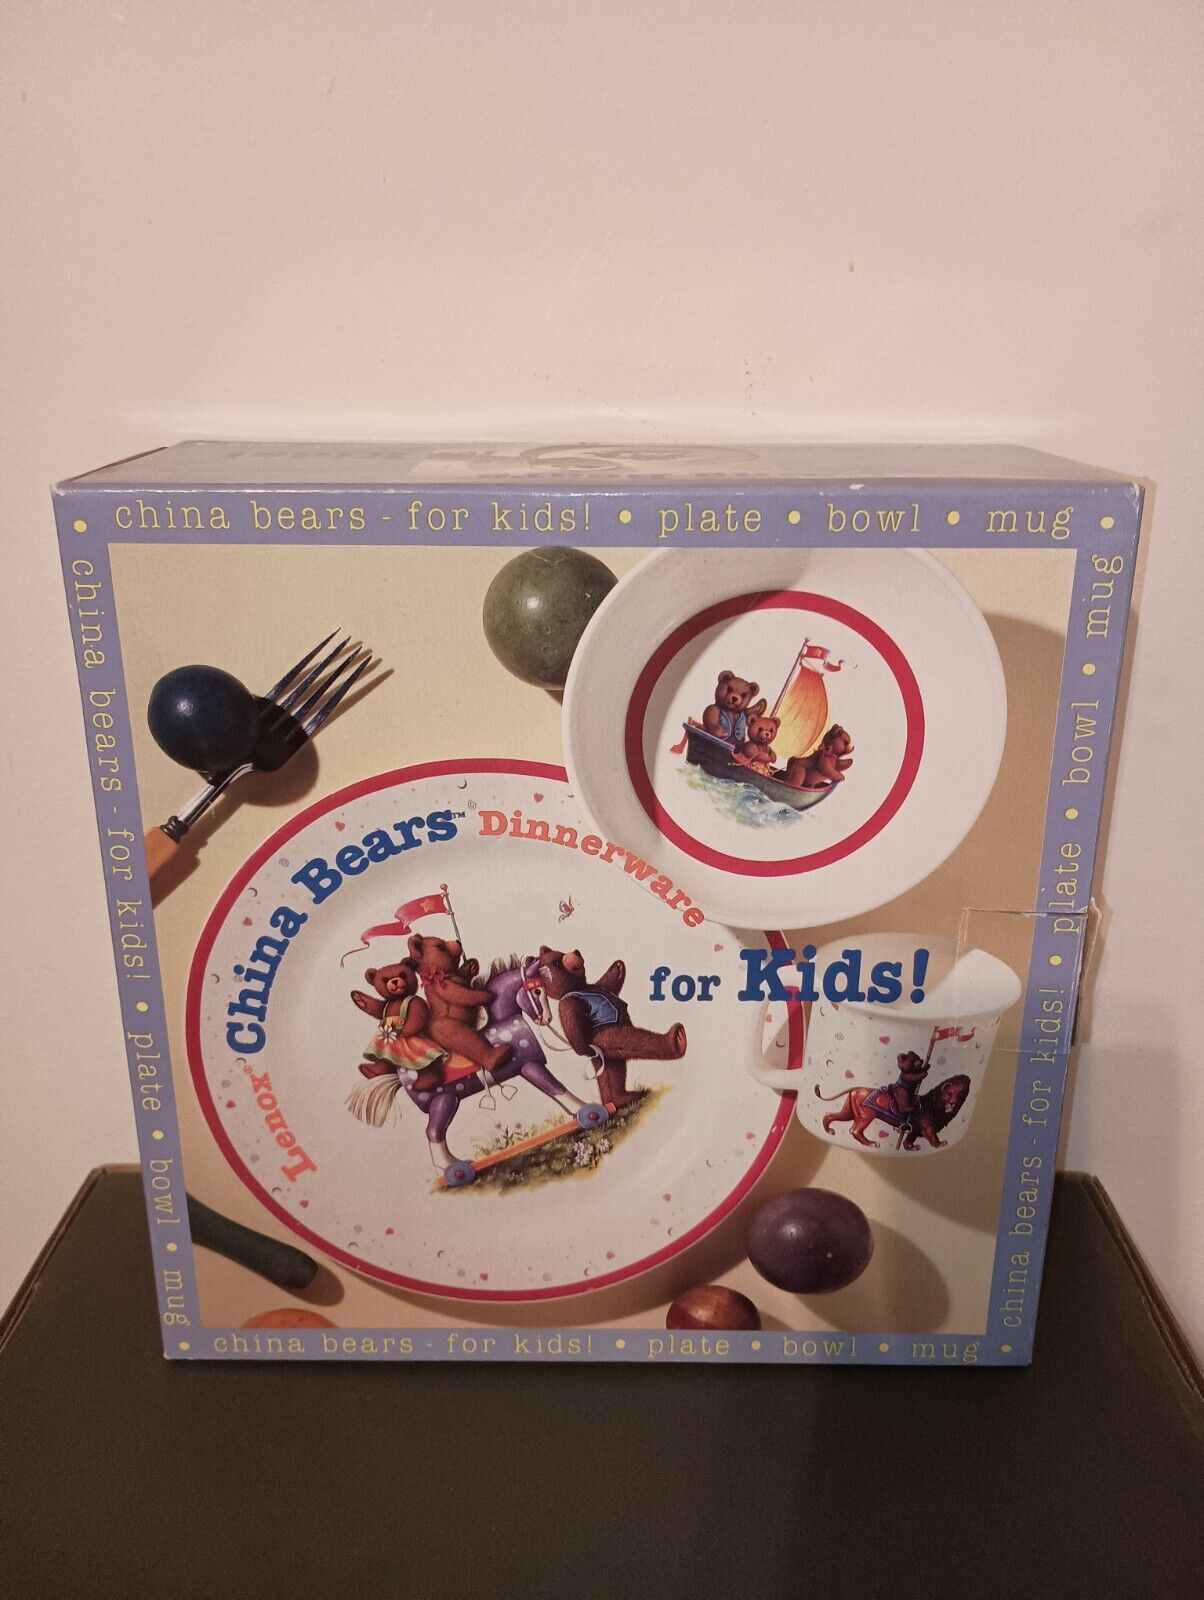 LENOX CHINA BEARS DINNERWARE FOR KIDS - 3 PIECE SET New In Wrapper